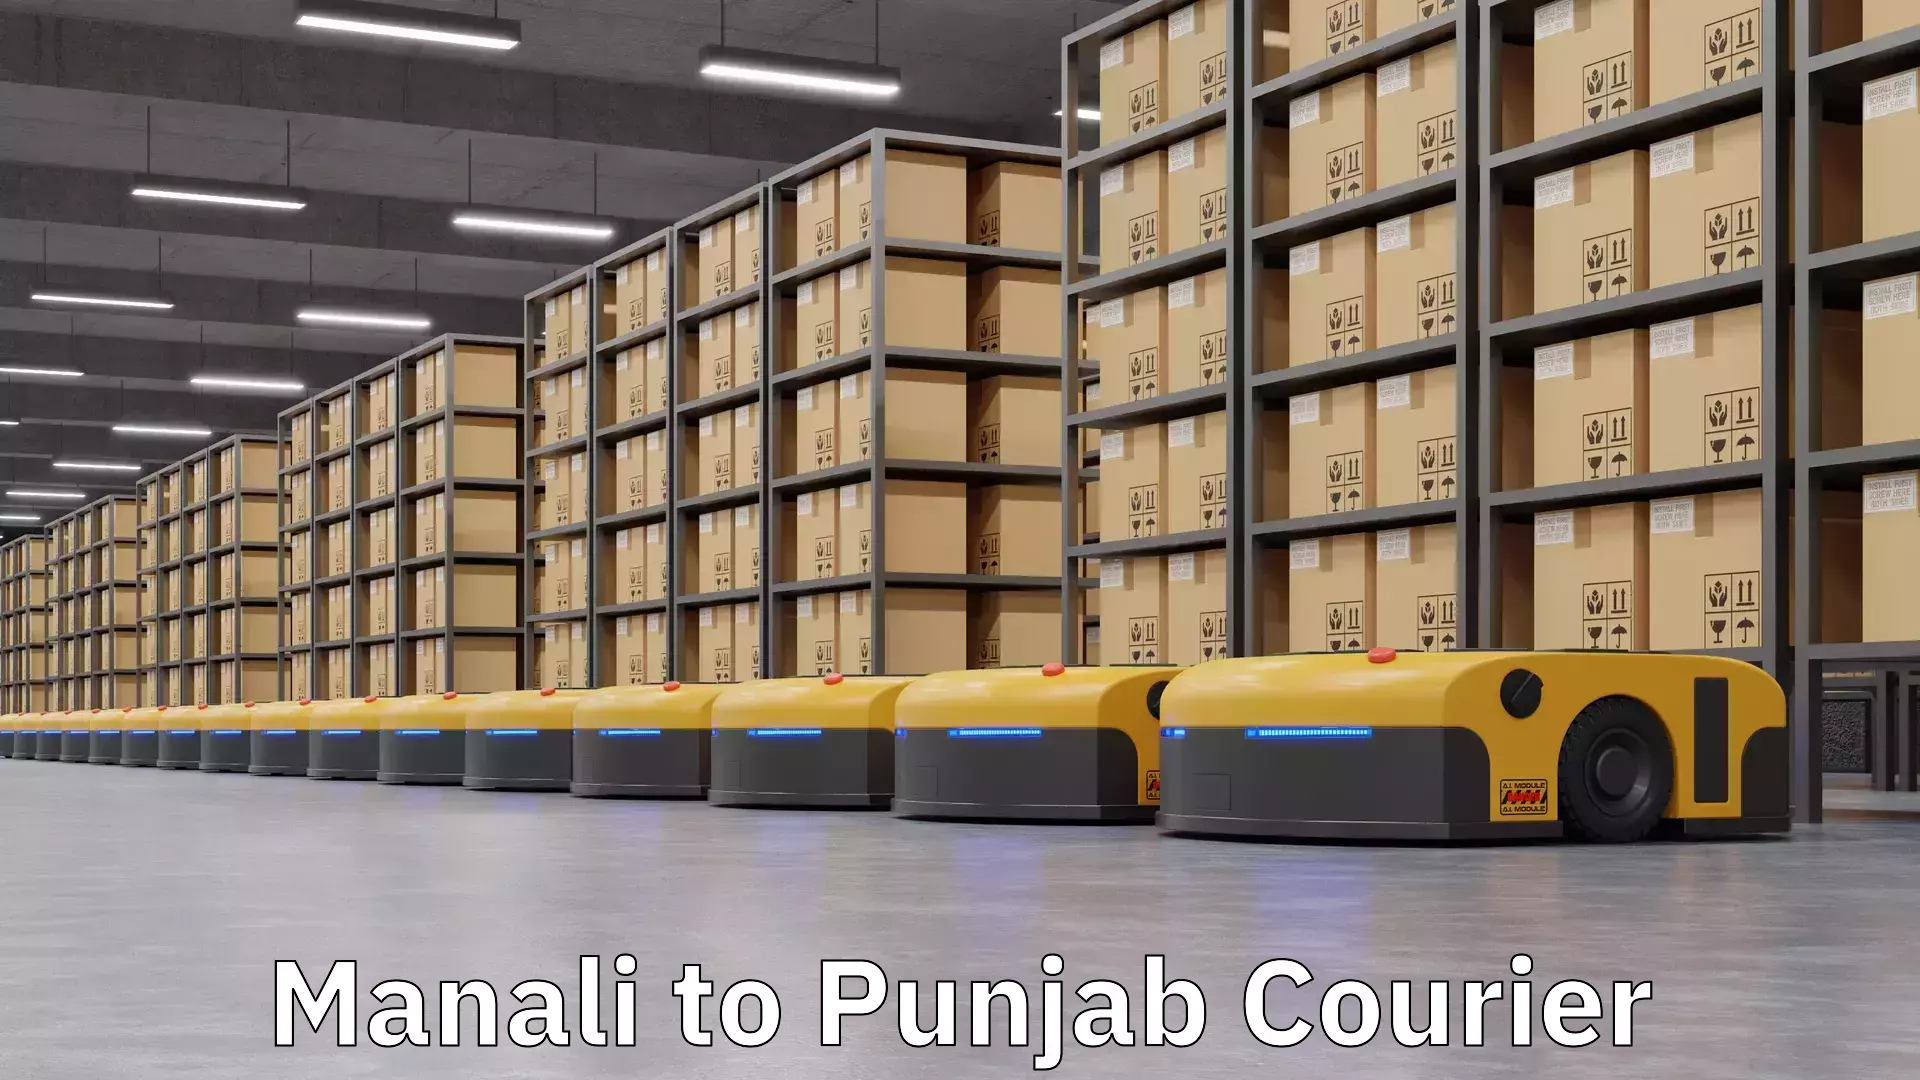 Flexible delivery scheduling in Manali to Punjab